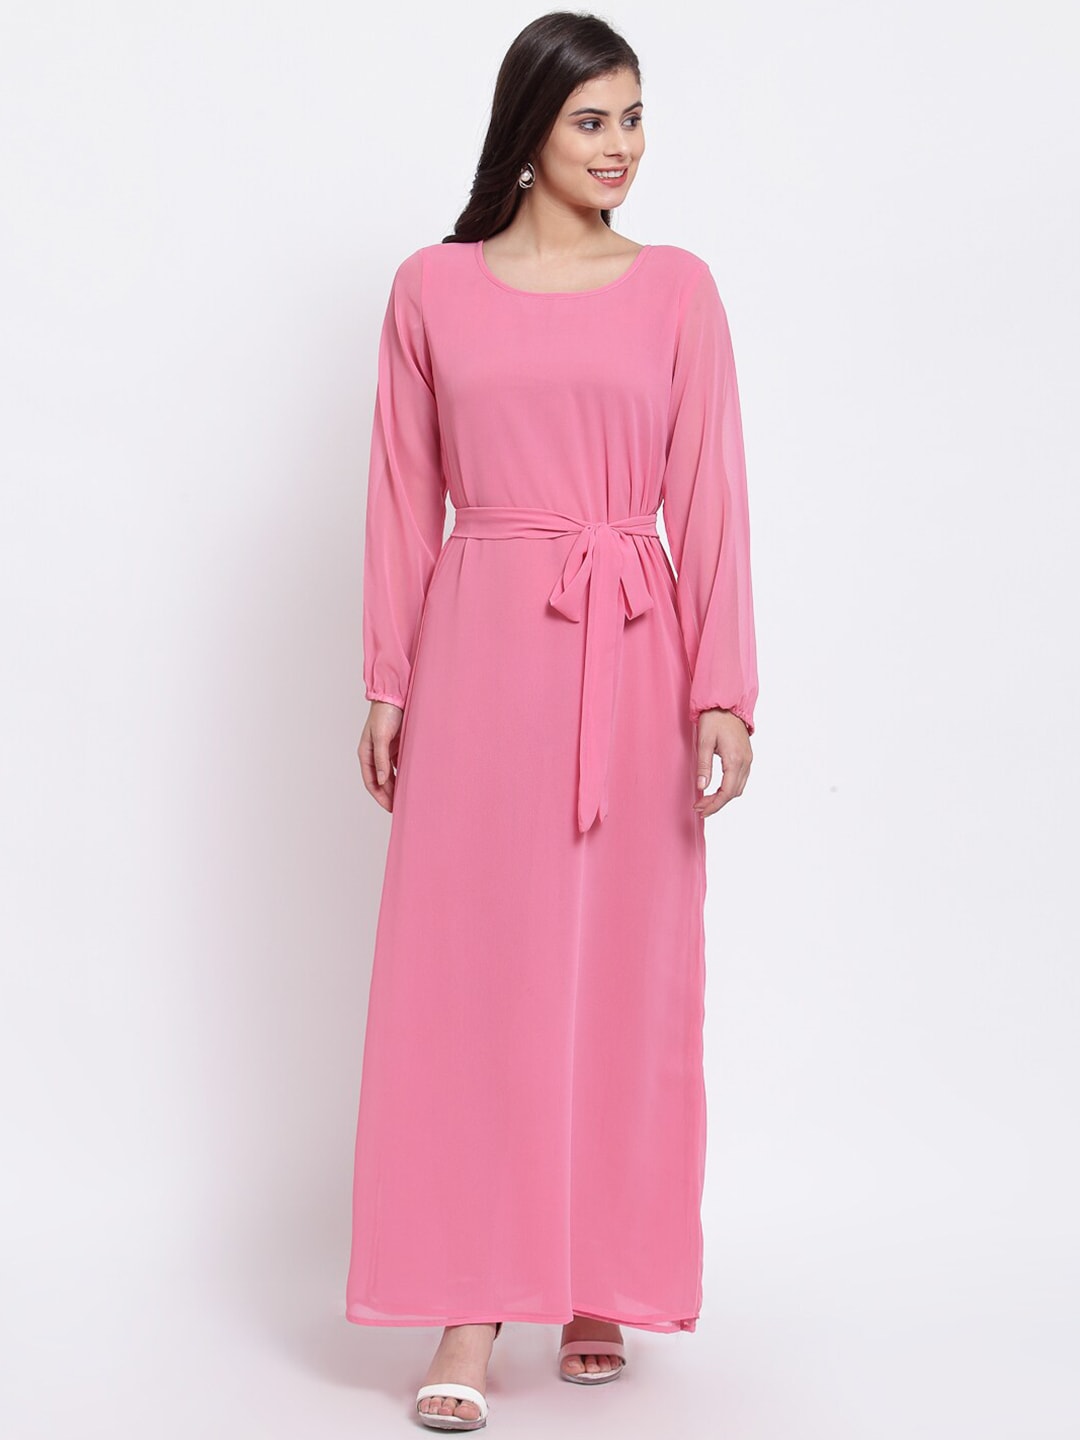 Just Wow Pink Crepe Maxi Dress Price in India